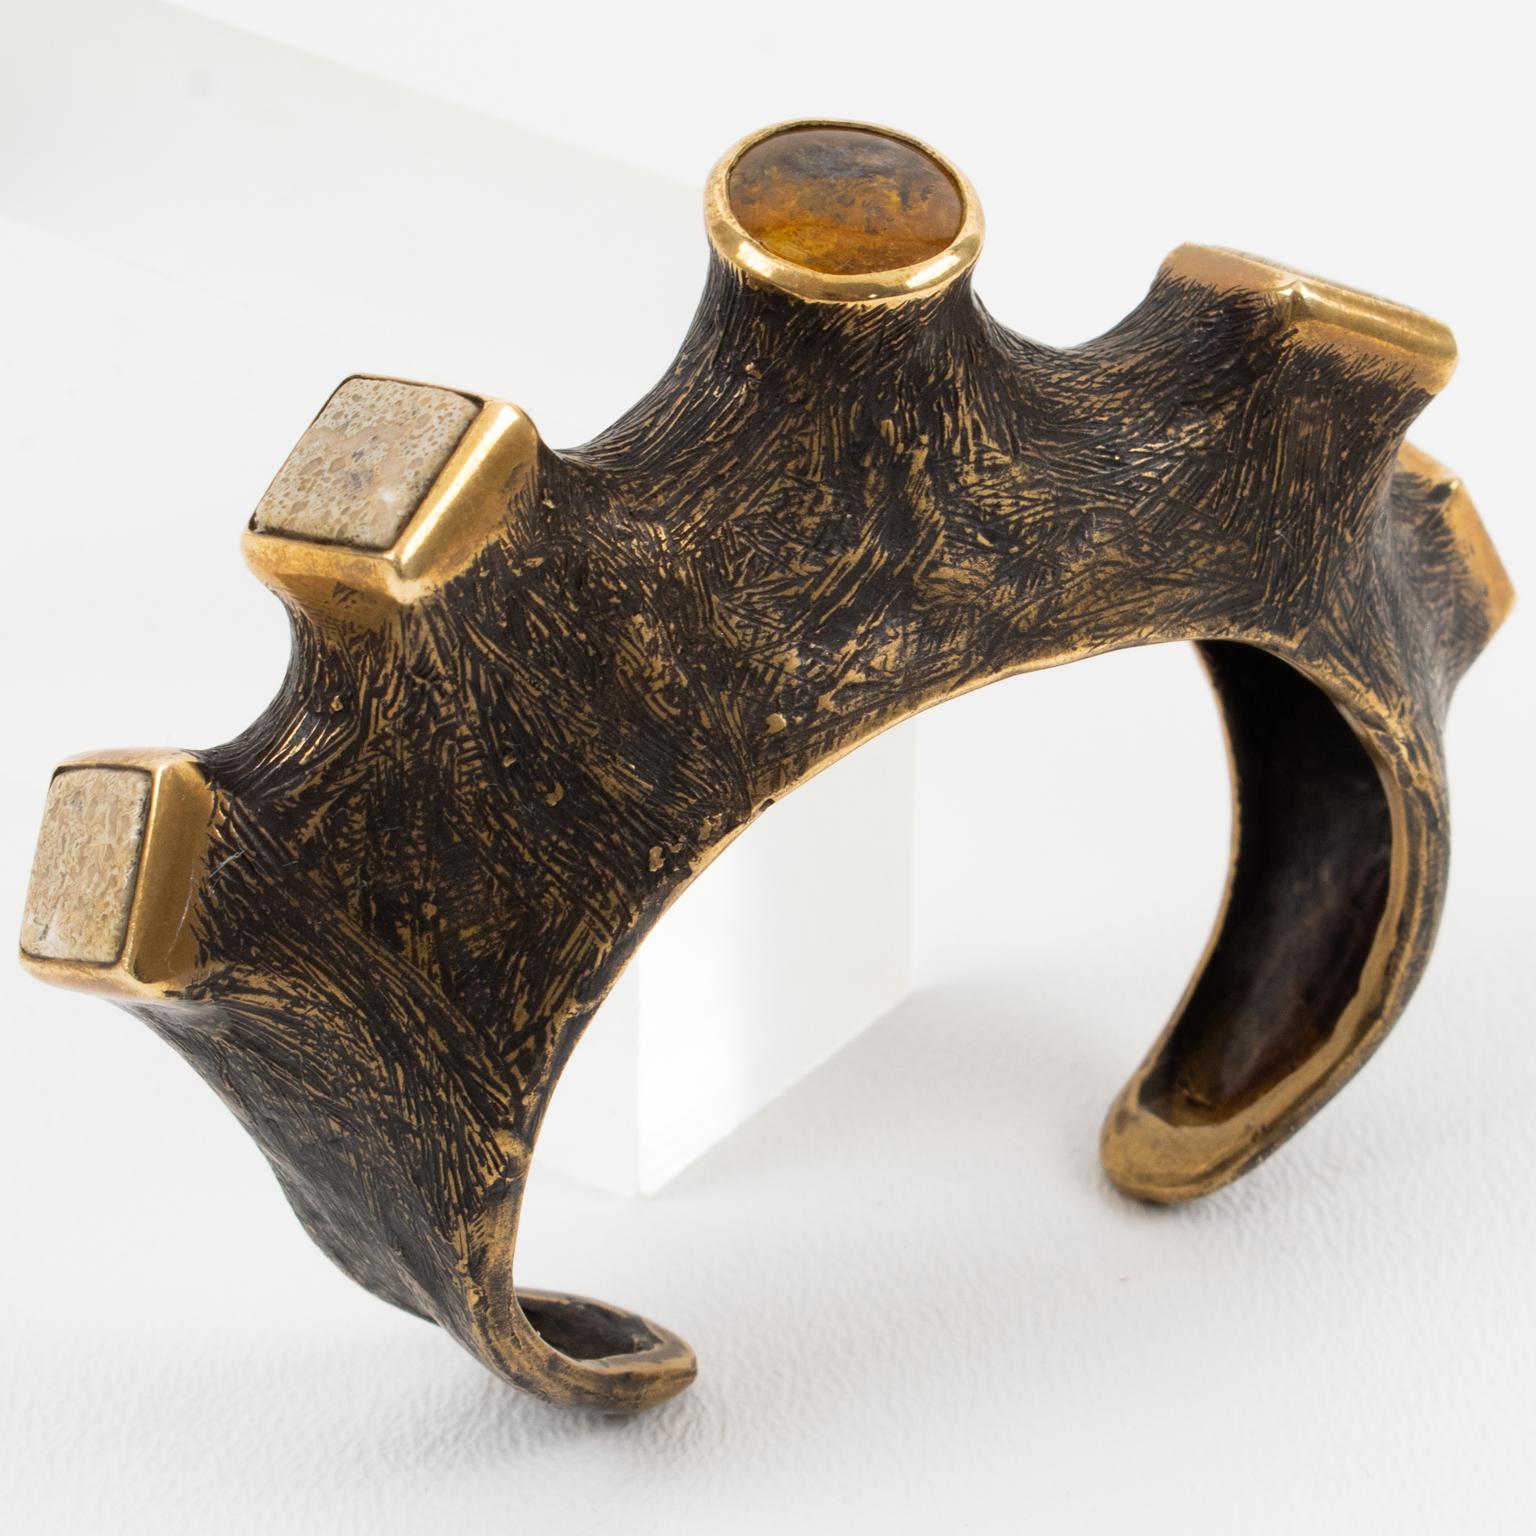 This stunning sculptural brutalist bronze cuff bracelet was hand-crafted by a French artist in the 1980s. This is a one-of-a-kind piece with organic inspiration. The bangle features a carved and textured tree branch with an original brown patina,